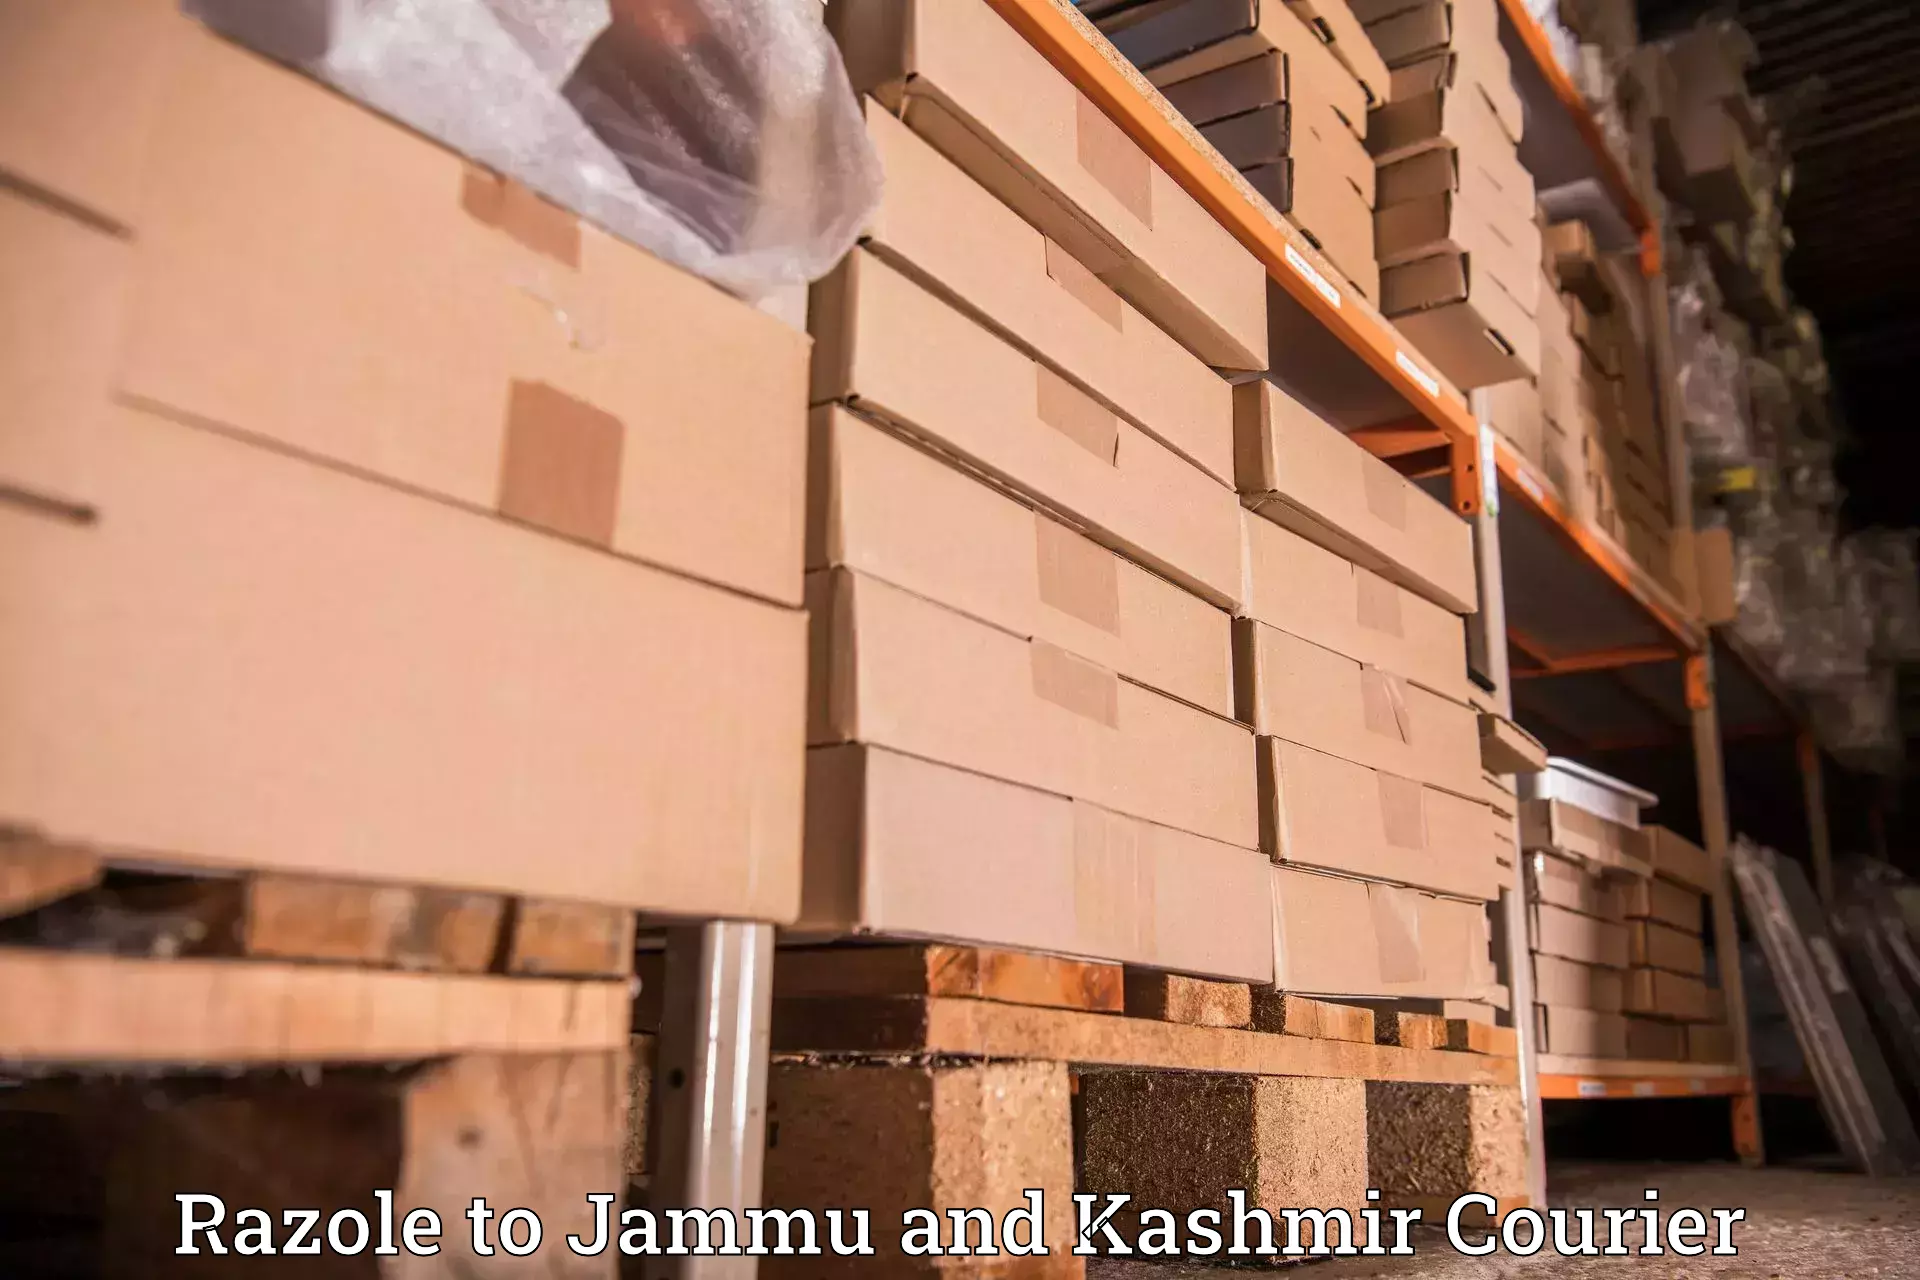 Specialized shipment handling in Razole to Sopore